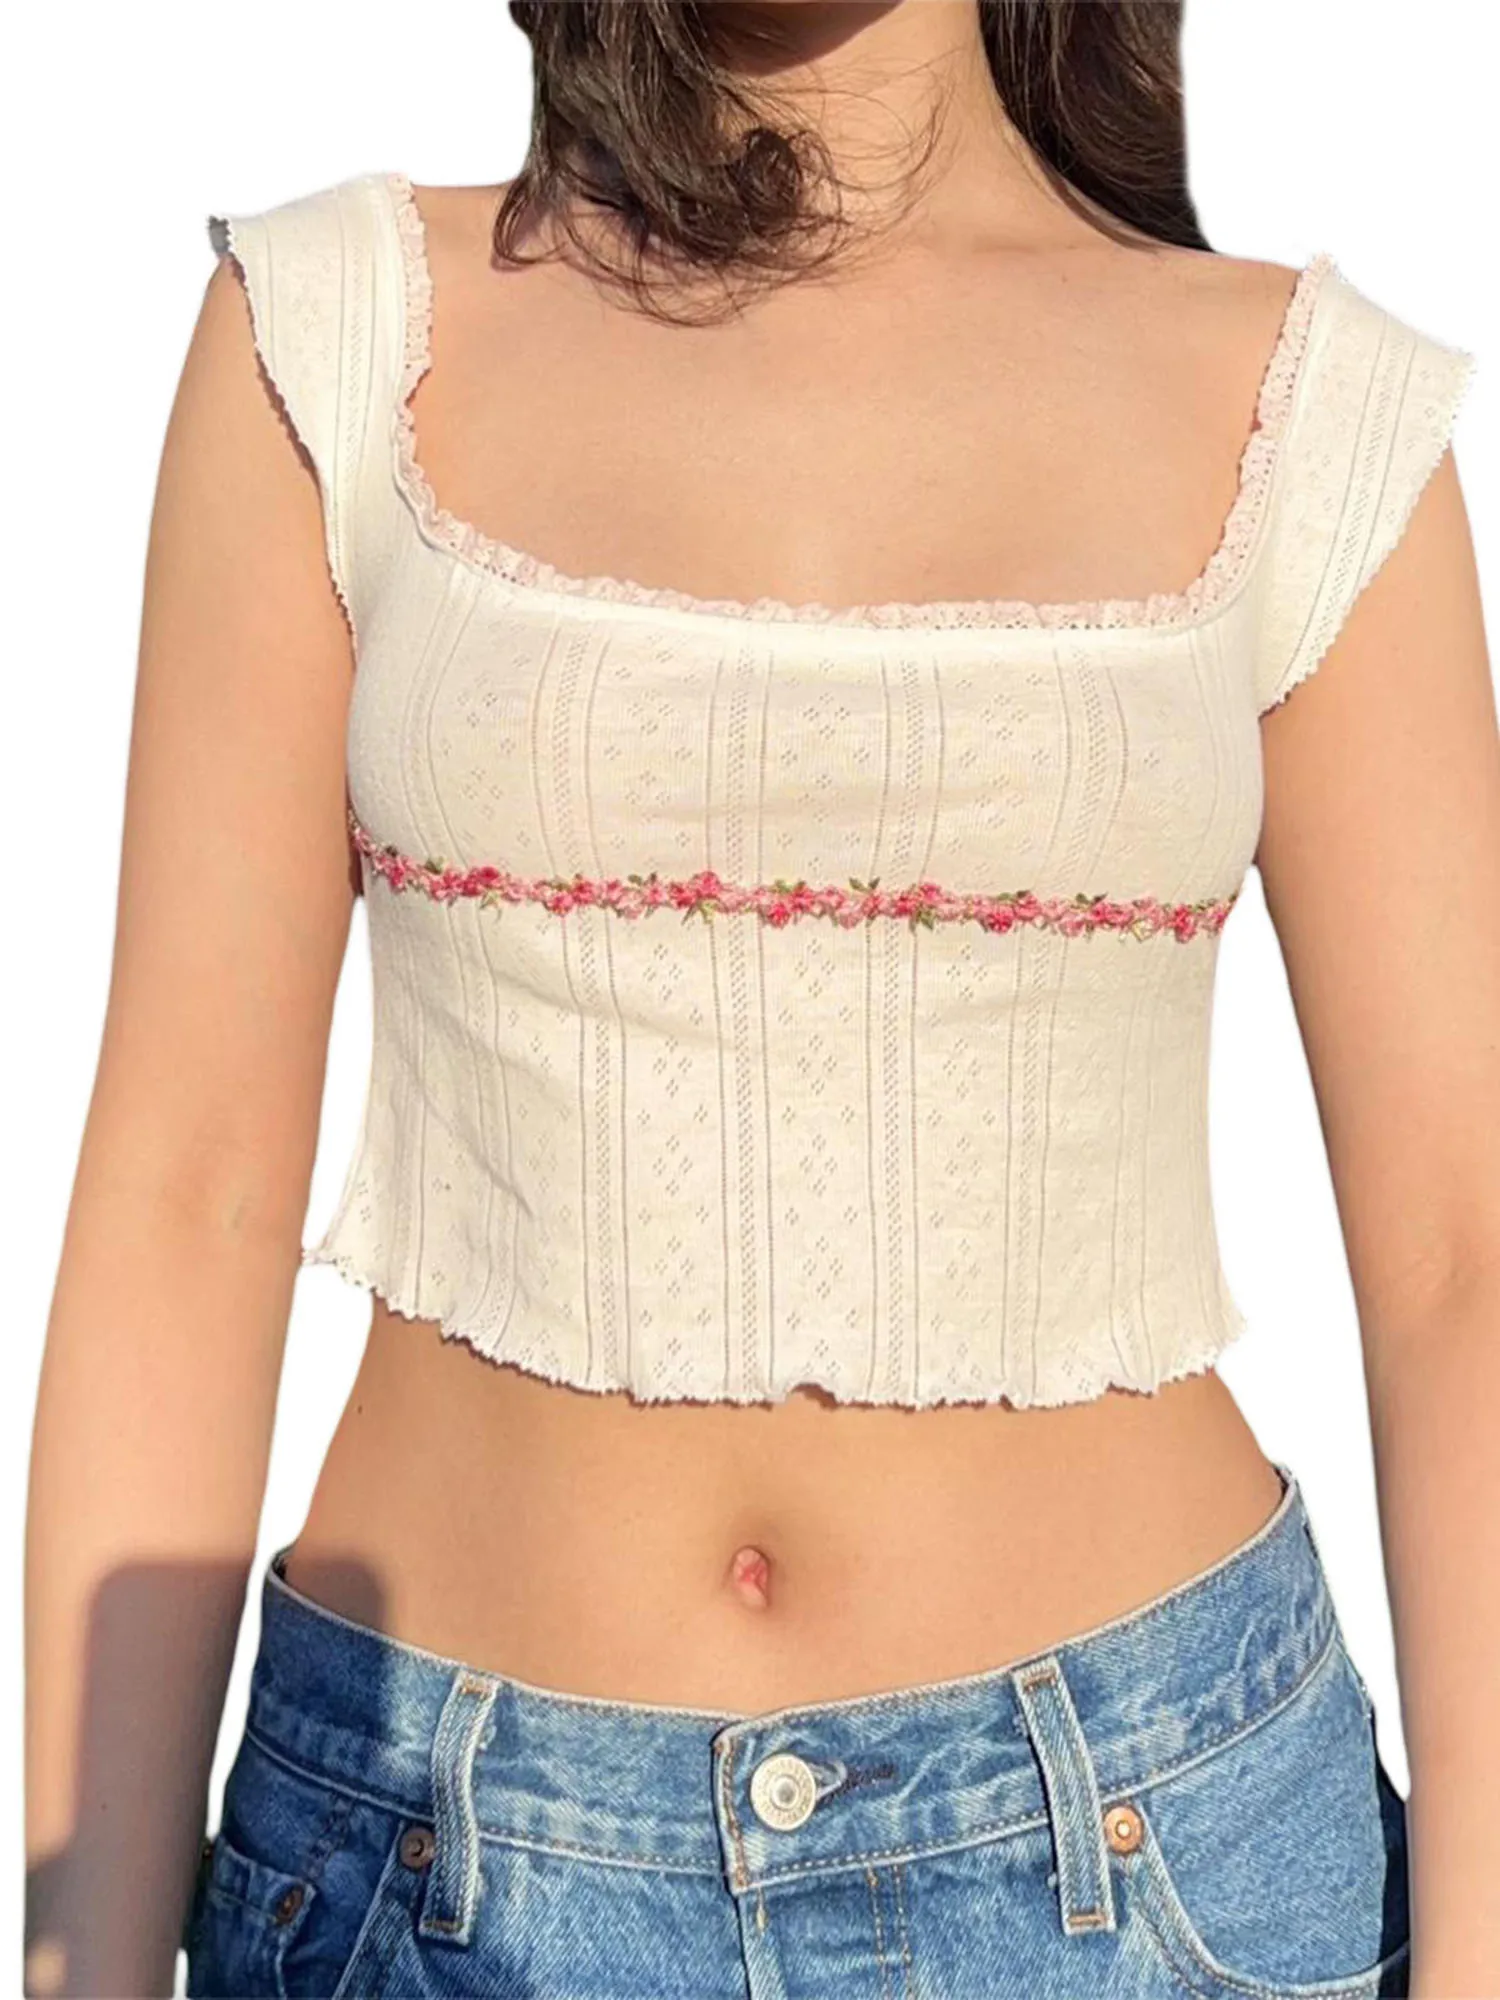 

Women s Floral Lace Trimmed Sleeveless Crop Tops with Square Neckline for Summer Fashion